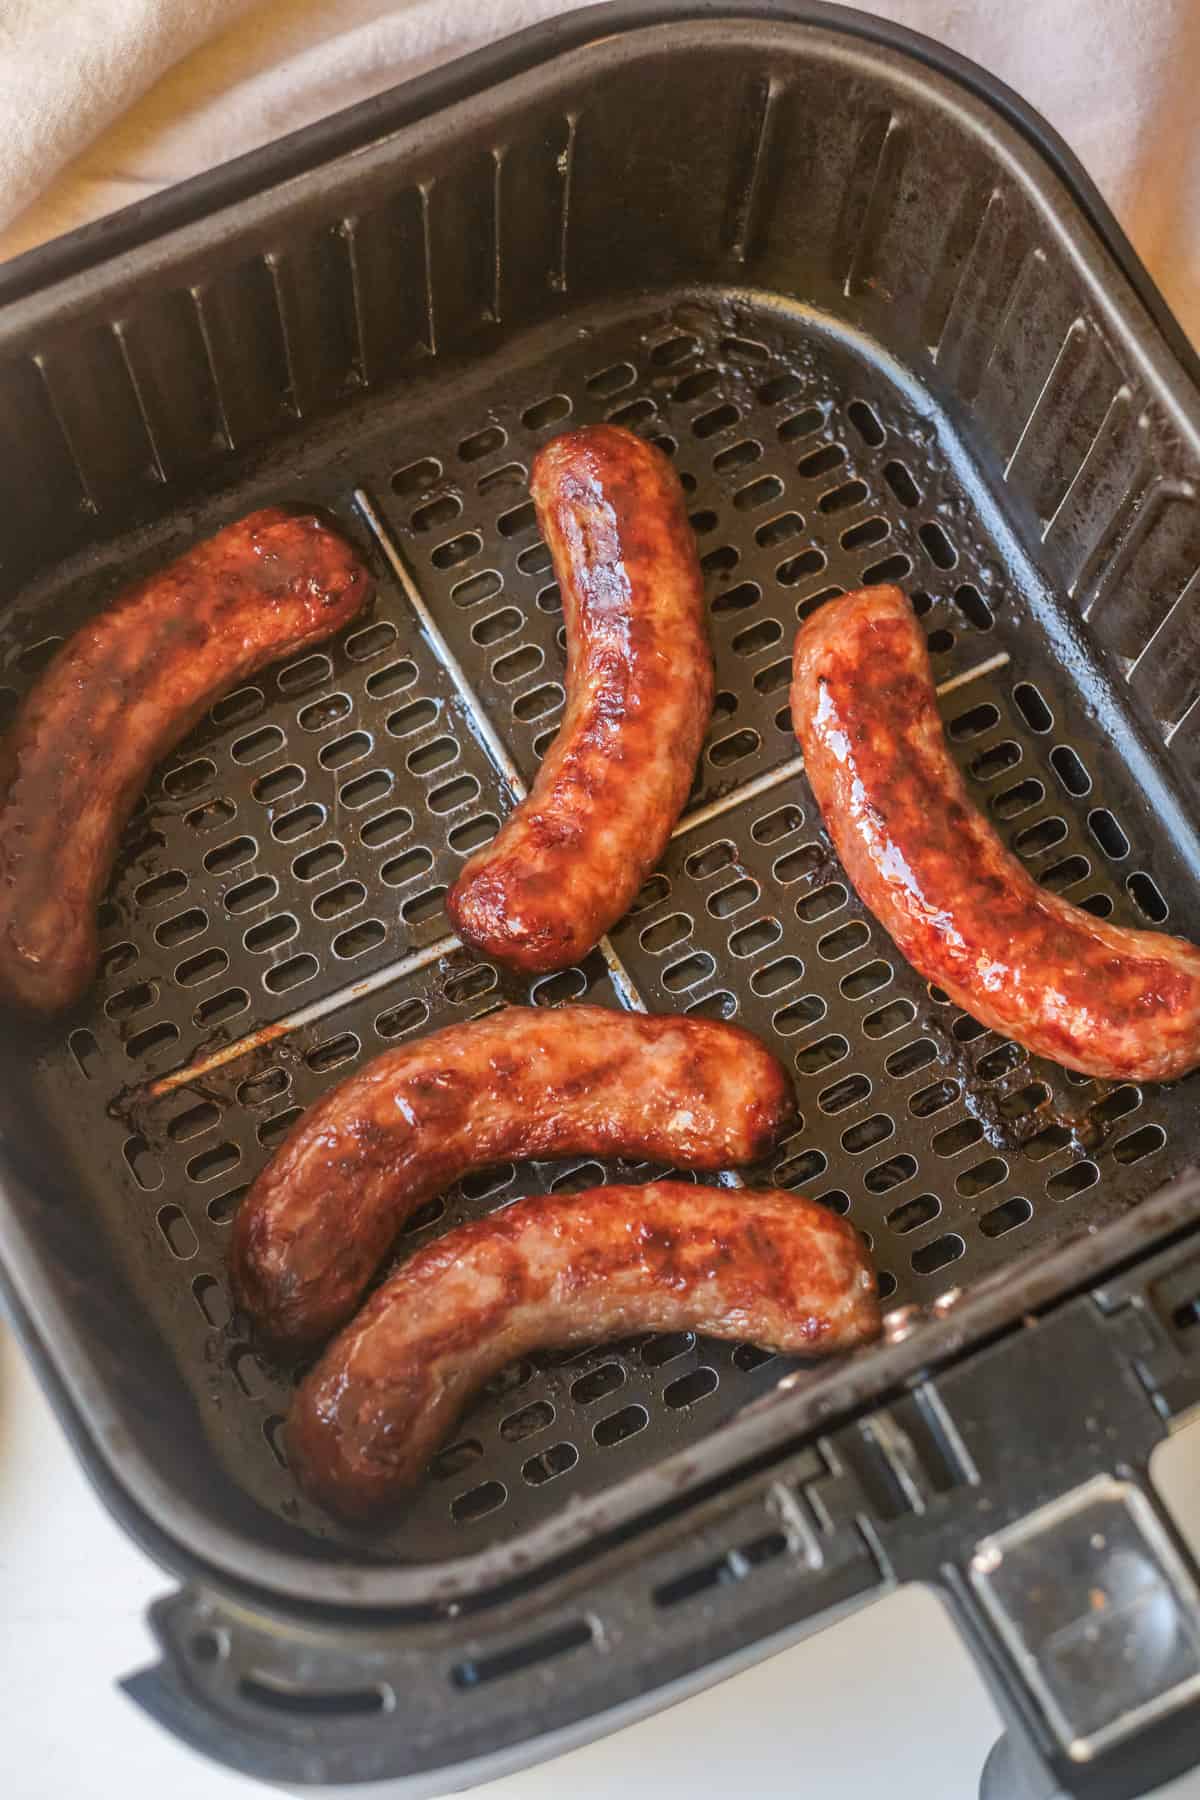 Cooked brats in air fryer.